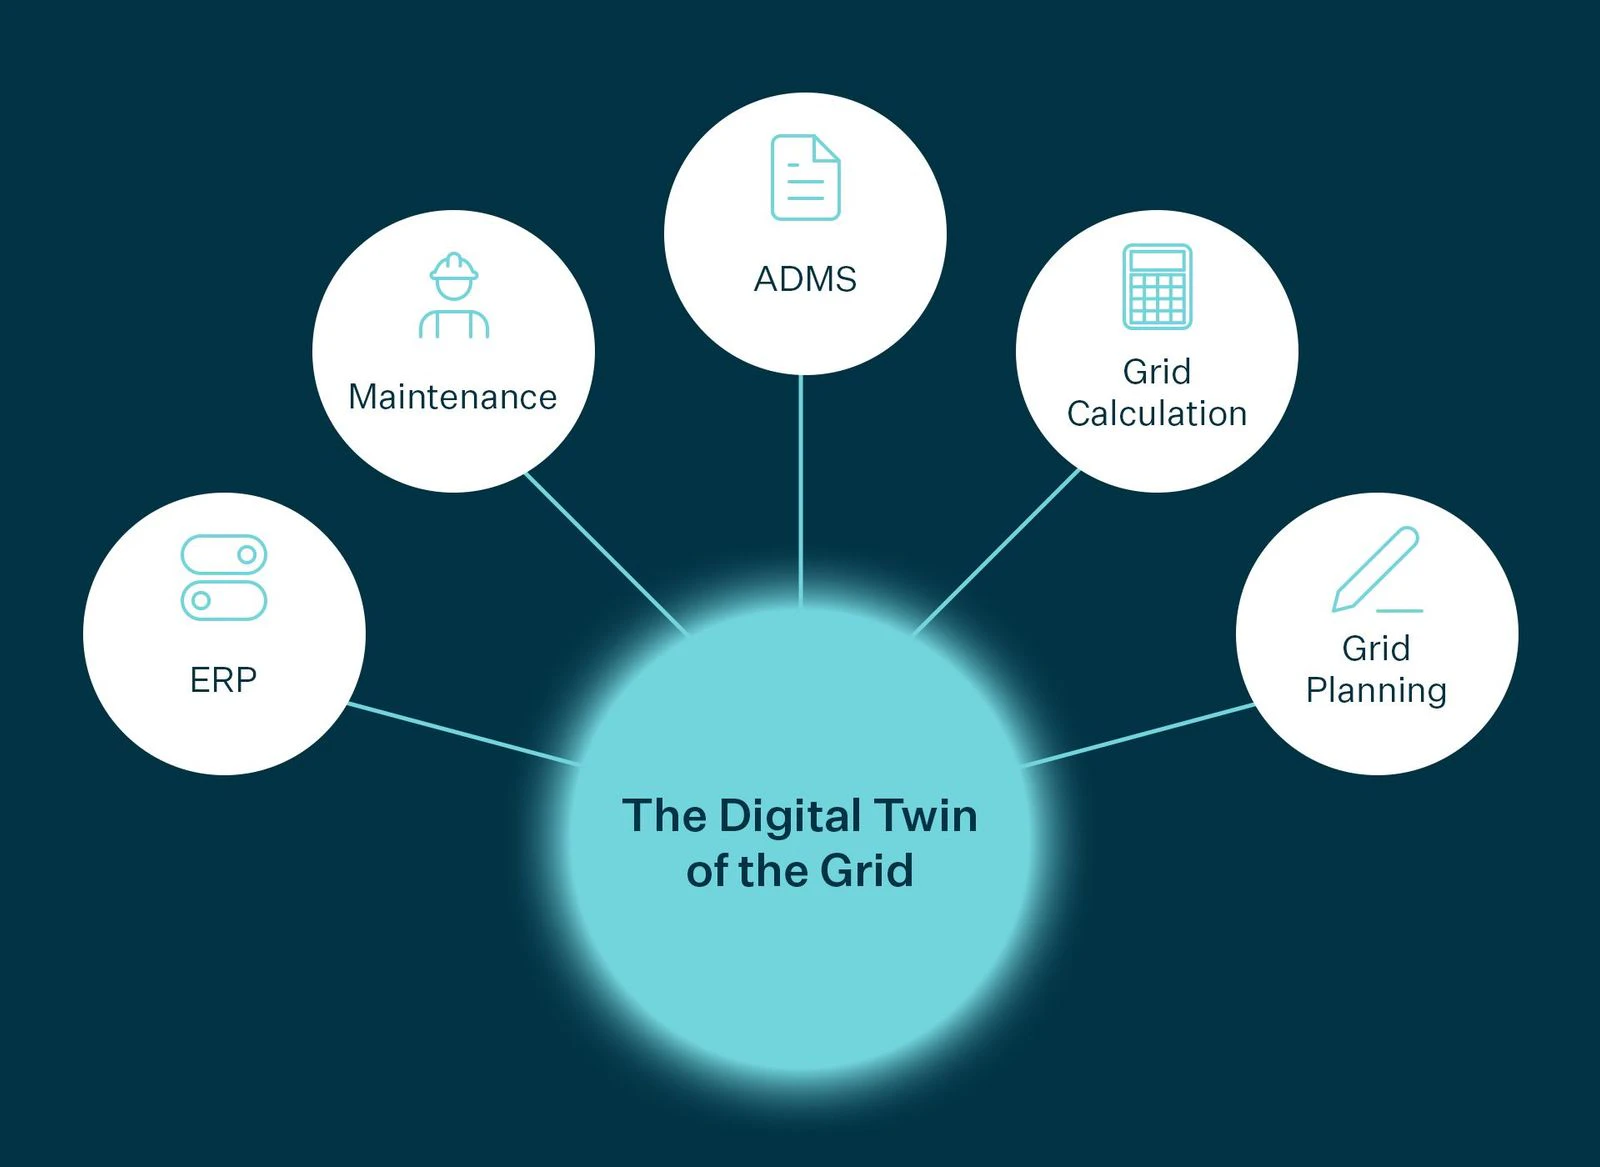 The digital twin of the grid